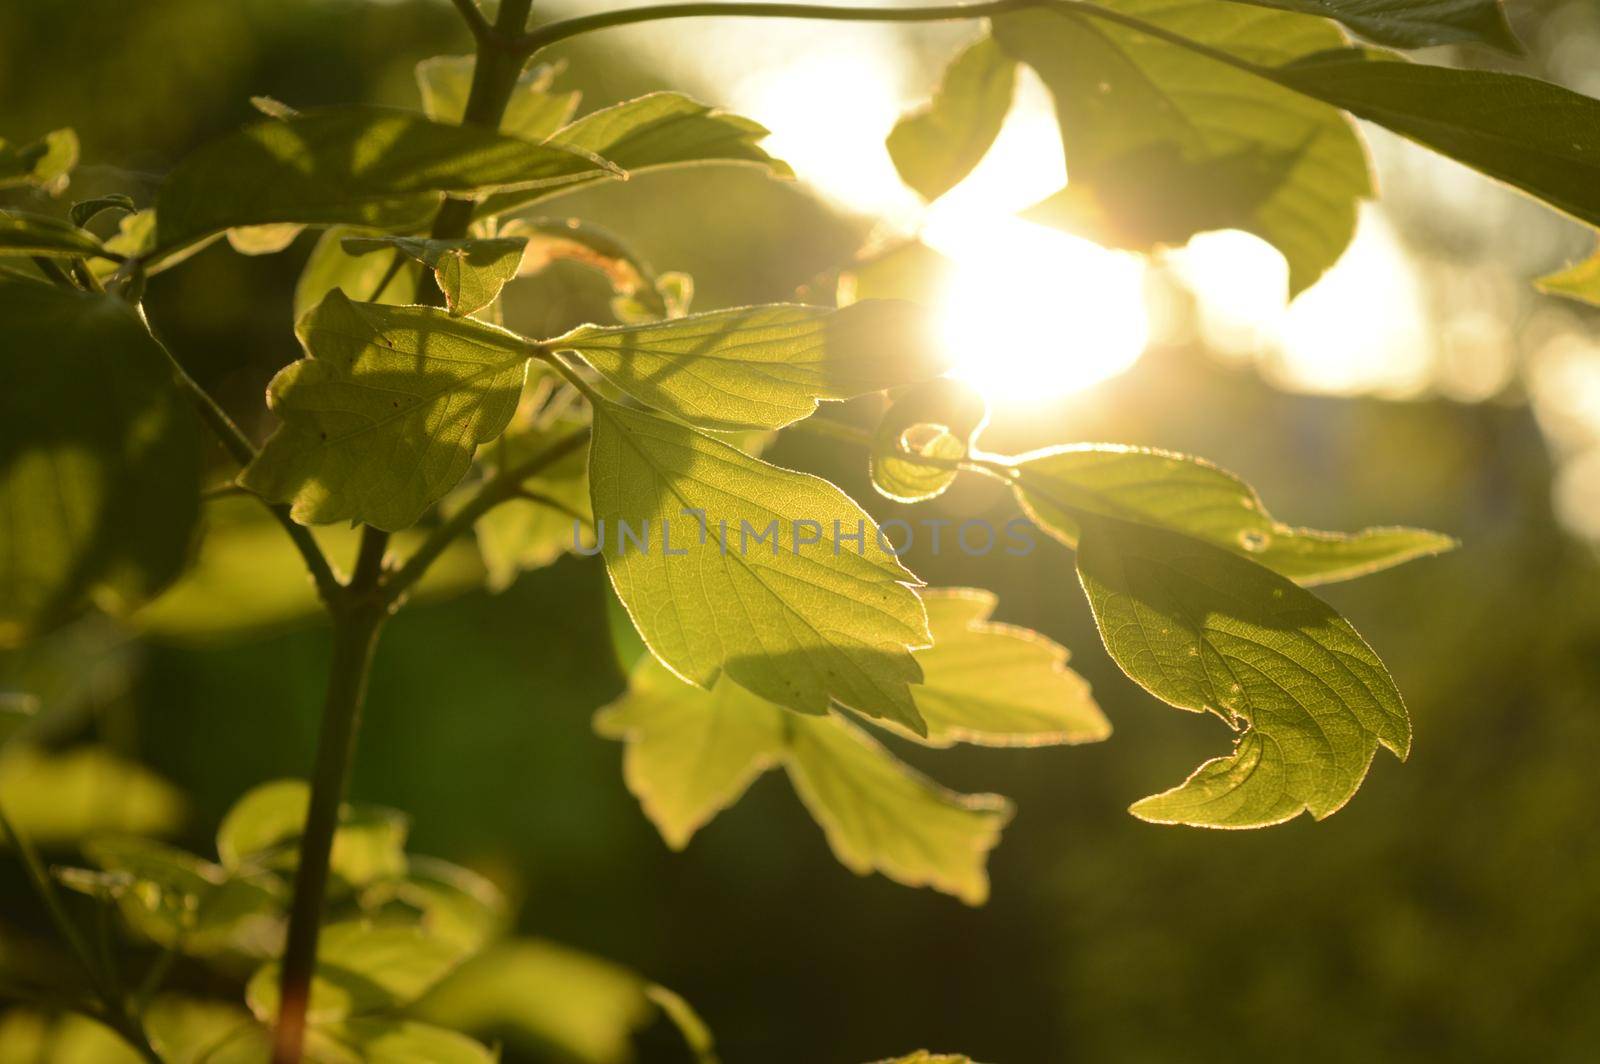 A beautiful sunshine peeks through the fresh green leaves of this clean environment image.